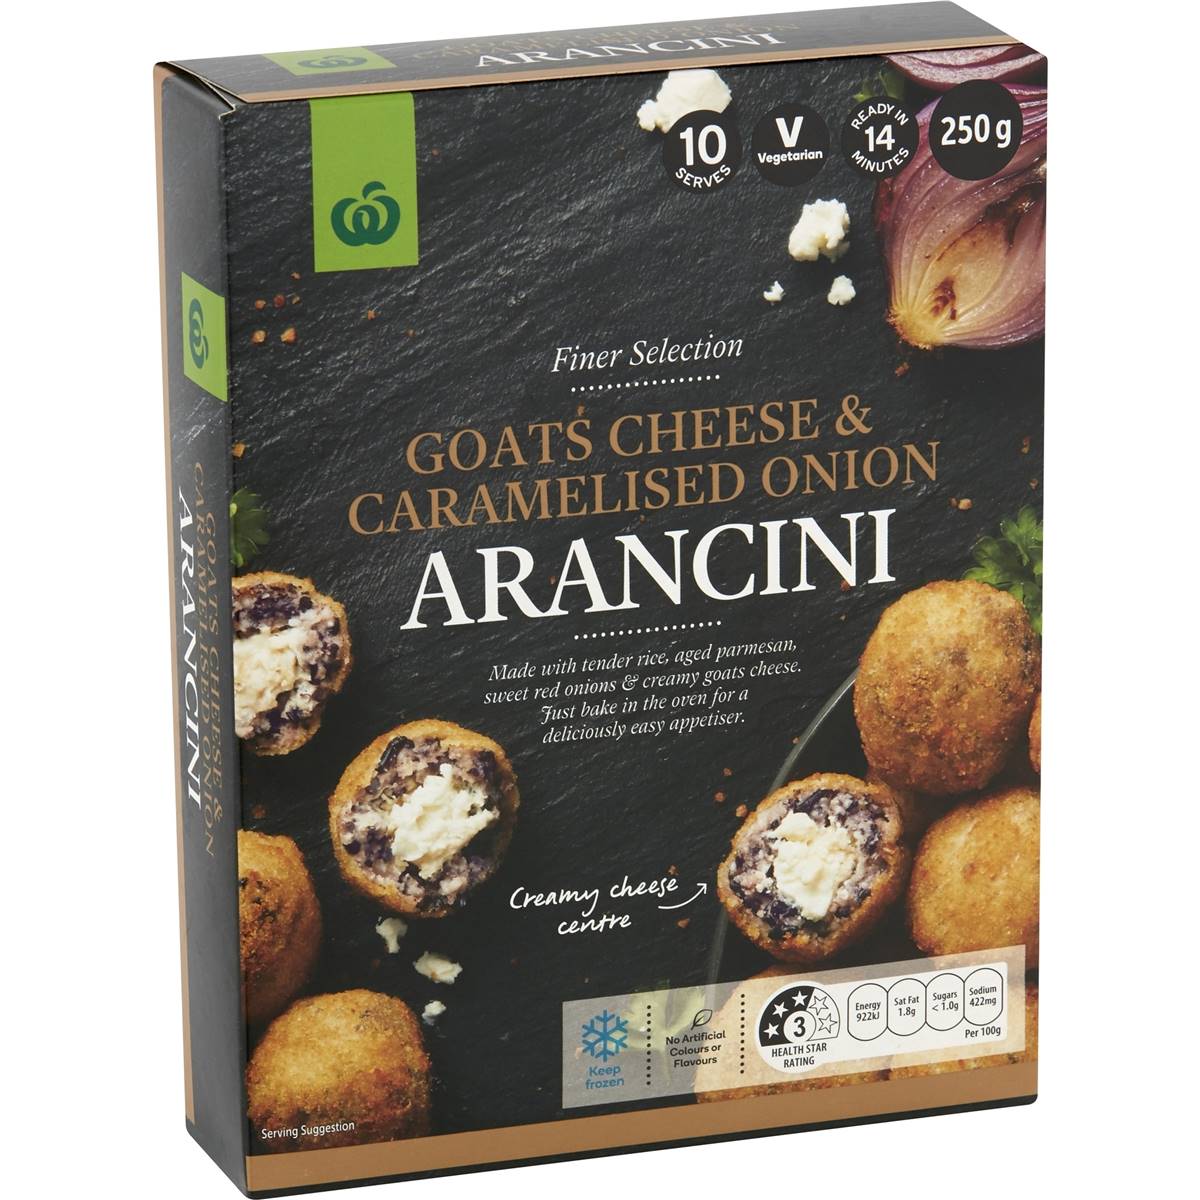 Calories in Woolworths Goats Cheese & Caramelised Onion Arancini